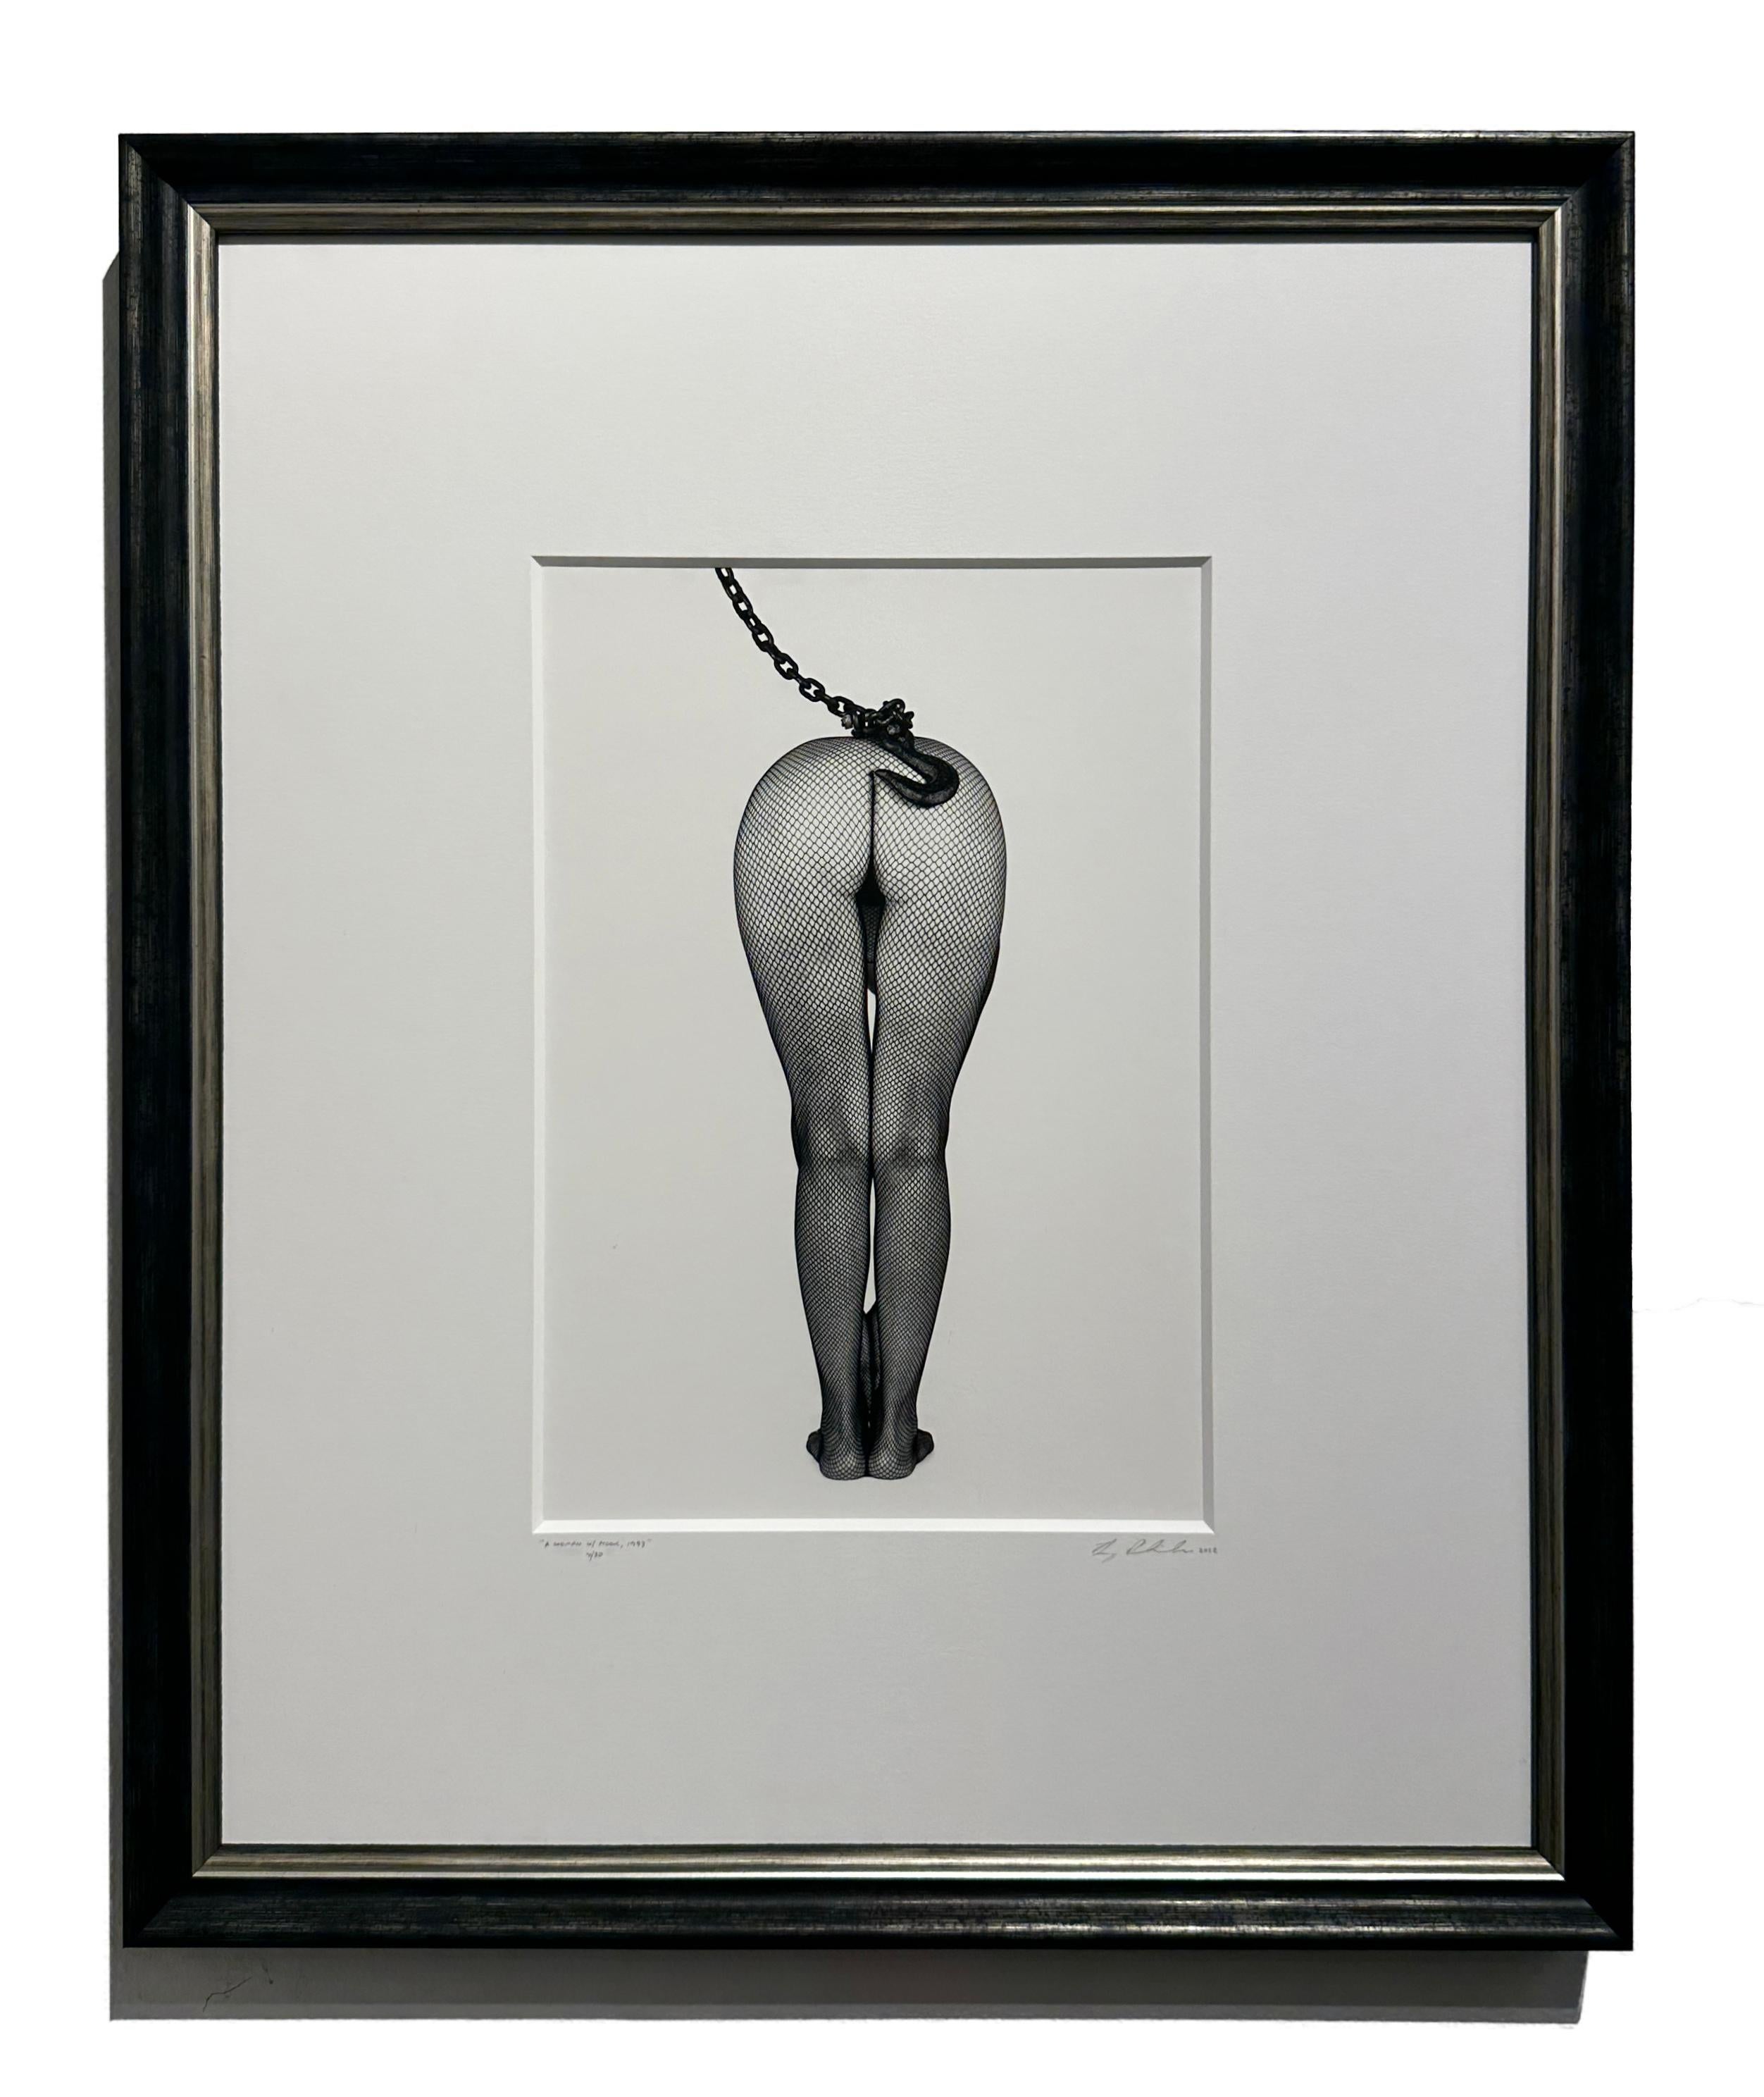 A Woman with a Hook, 1993 - Erotic Photo, Fishnet Stockings, Matted and Framed - Contemporary Photograph by Doug Birkenheuer